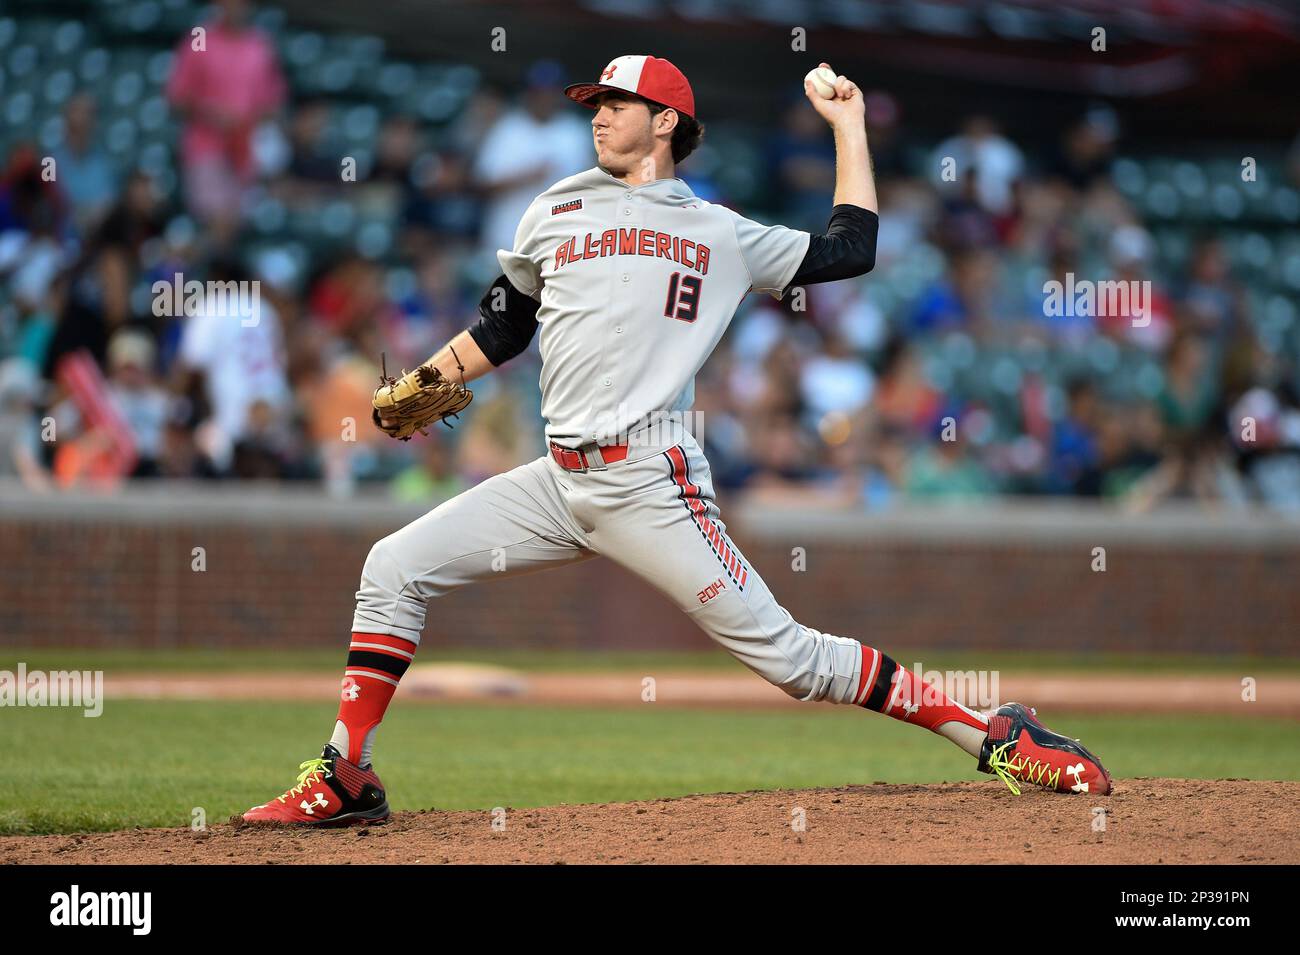 Hunter Bowling (13) of American Heritage High School in Lake Worth, Florida  during the Under Armour All-American Game on August 16, 2014 at Wrigley  Field in Chicago, Illinois. (Mike Janes/Four Seam Images